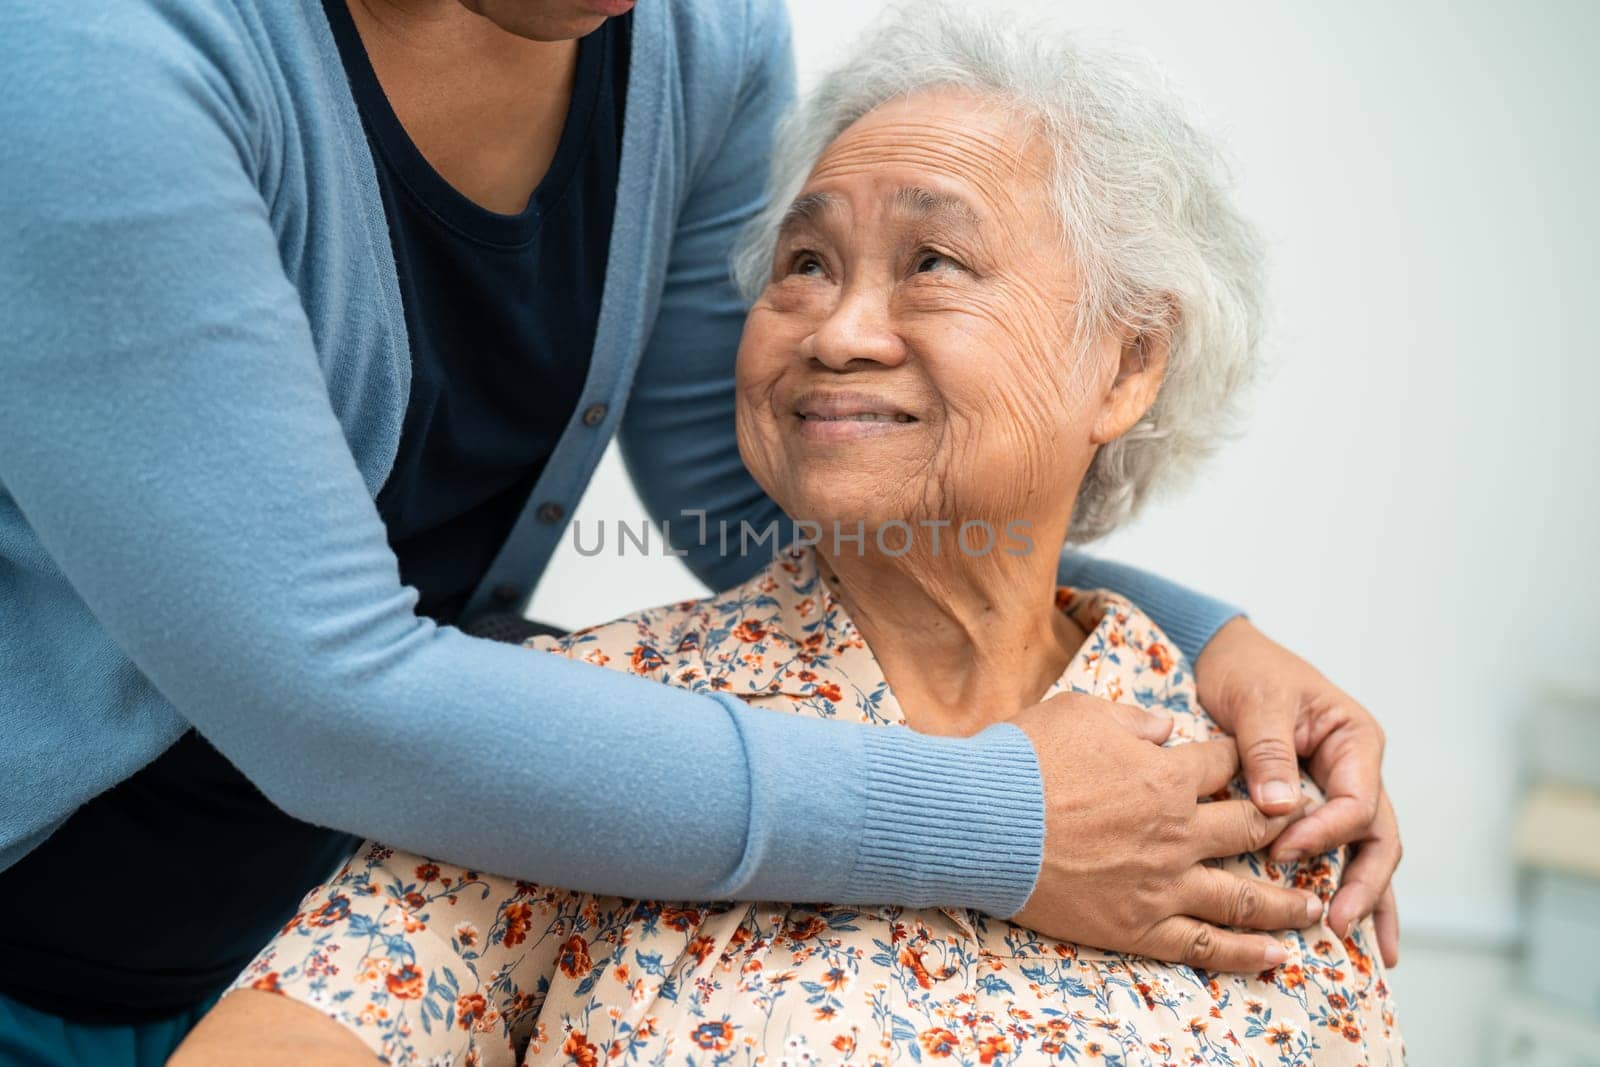 Caregiver help Asian elderly woman patient with love, care, encourage and empathy at nursing hospital, healthy strong medical concept. by pamai